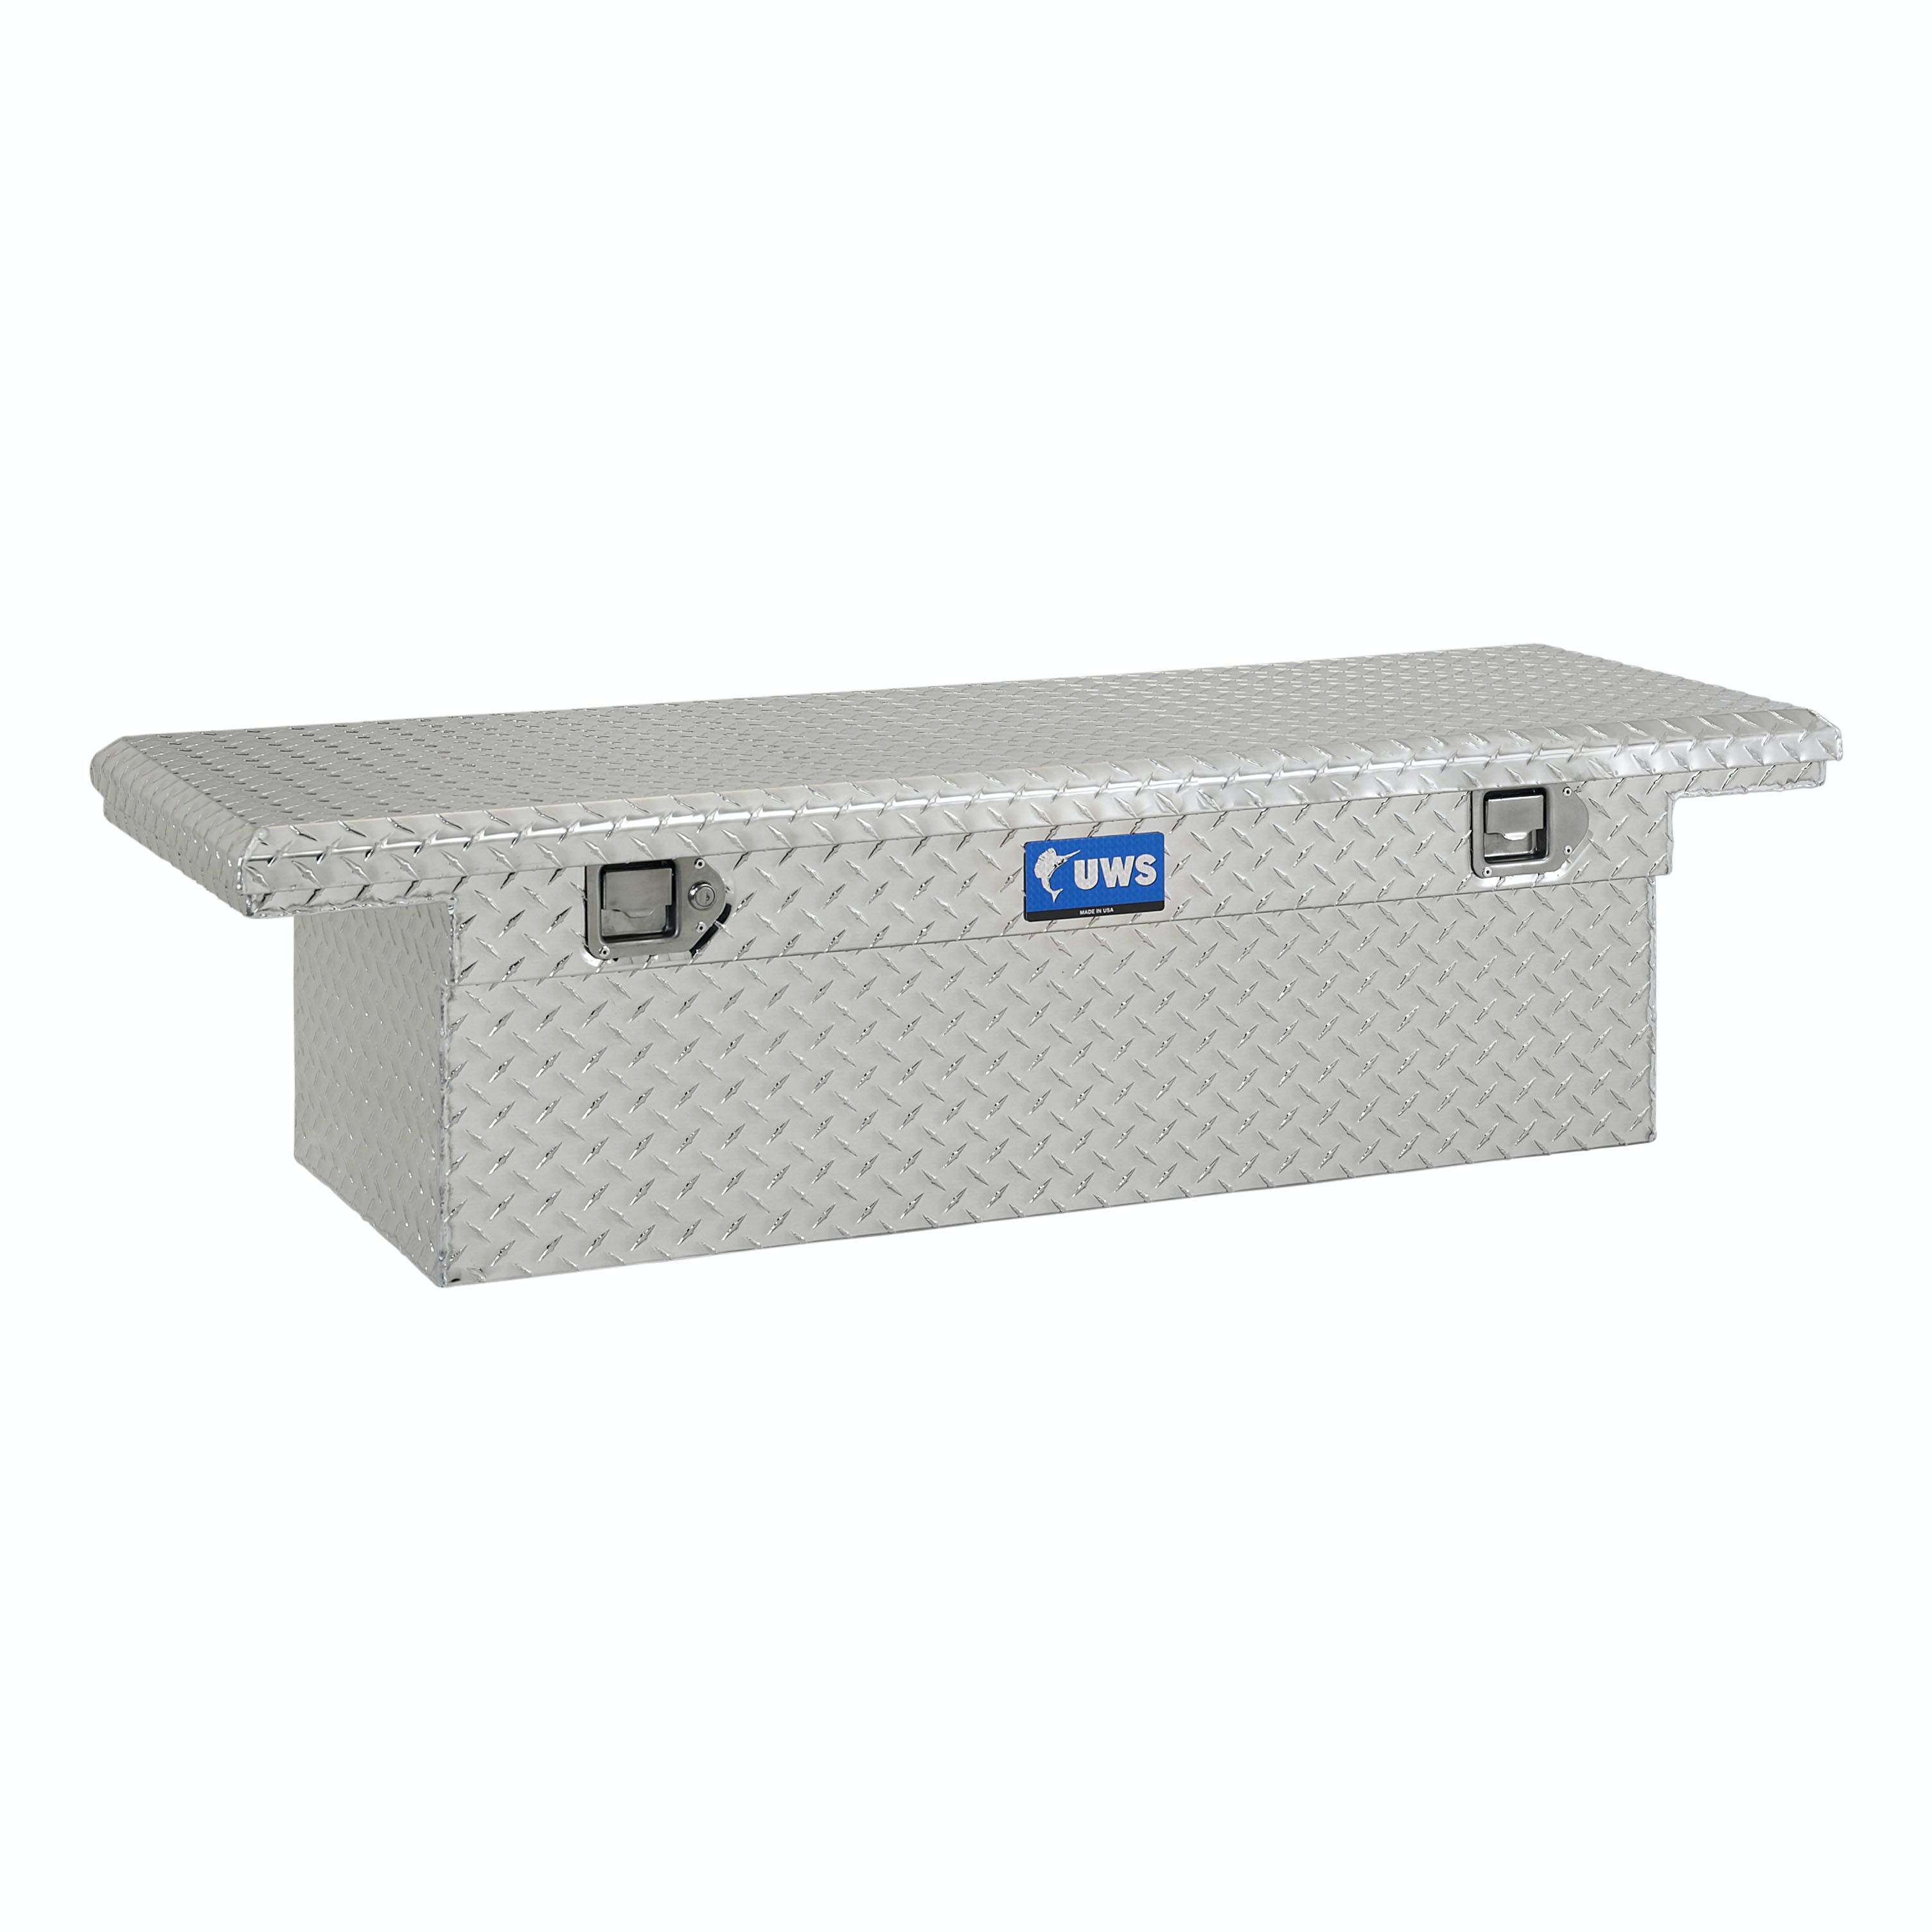 UWS TBS-58-LP 58 inch Aluminum Single Lid Crossover Toolbox Low Profile